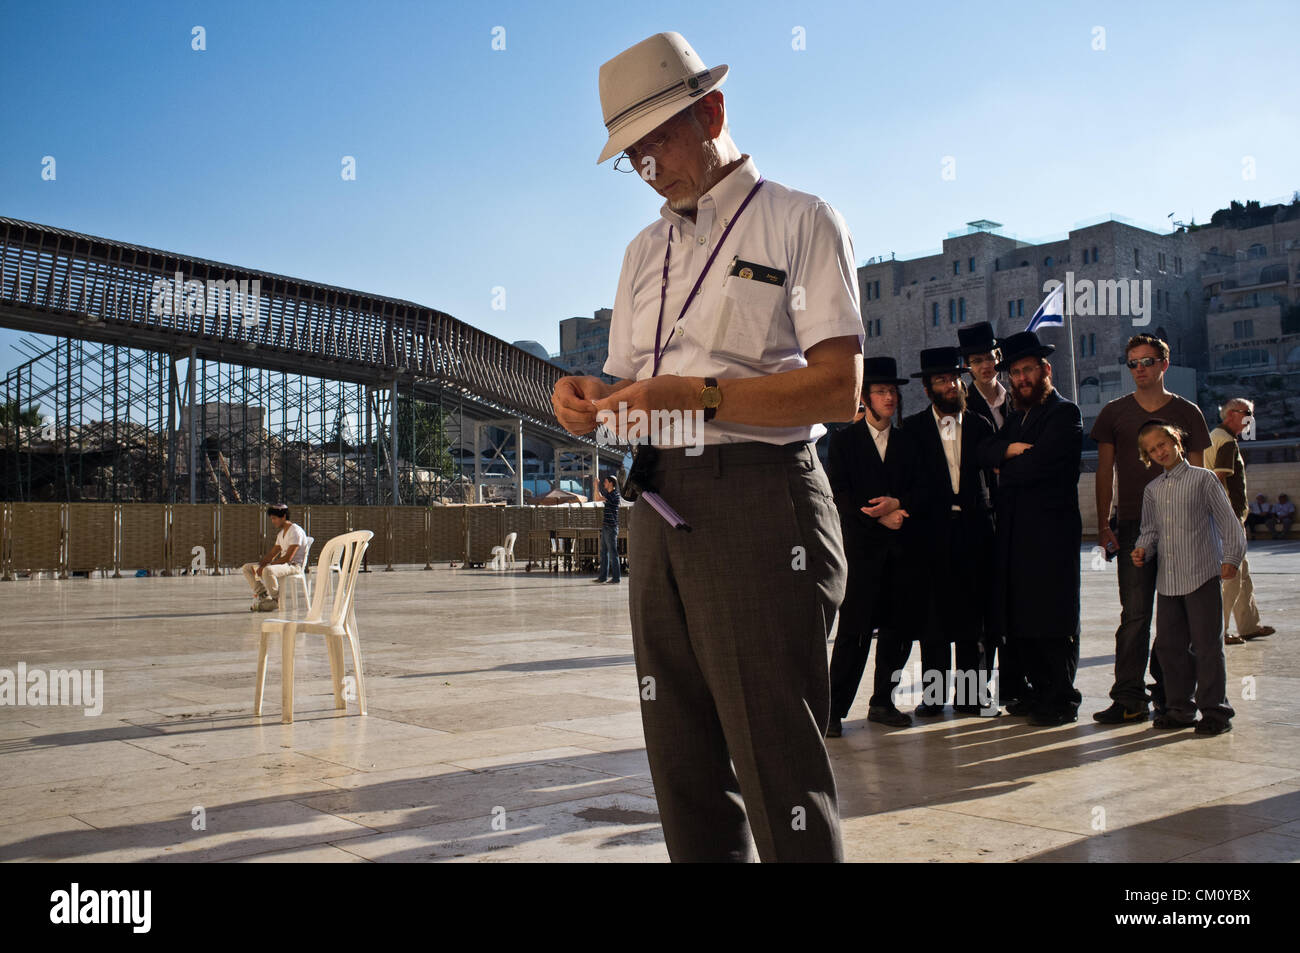 A Hibakusha, a Hiroshima child survivor, prepares what is perhaps the first origami crane prayer to be laid in the crevices between the Western wall stones in its 2,000 year history. Jerusalem, Israel. 10-September-2012.  Hibakusha, survivors of the August 6th, 1945 bombing of Hiroshima, visit Israel to promote nuclear abolition. Calling “No More Hiroshimas, No More Nagasakis!” they place their prayers between the Kotel stones. Stock Photo